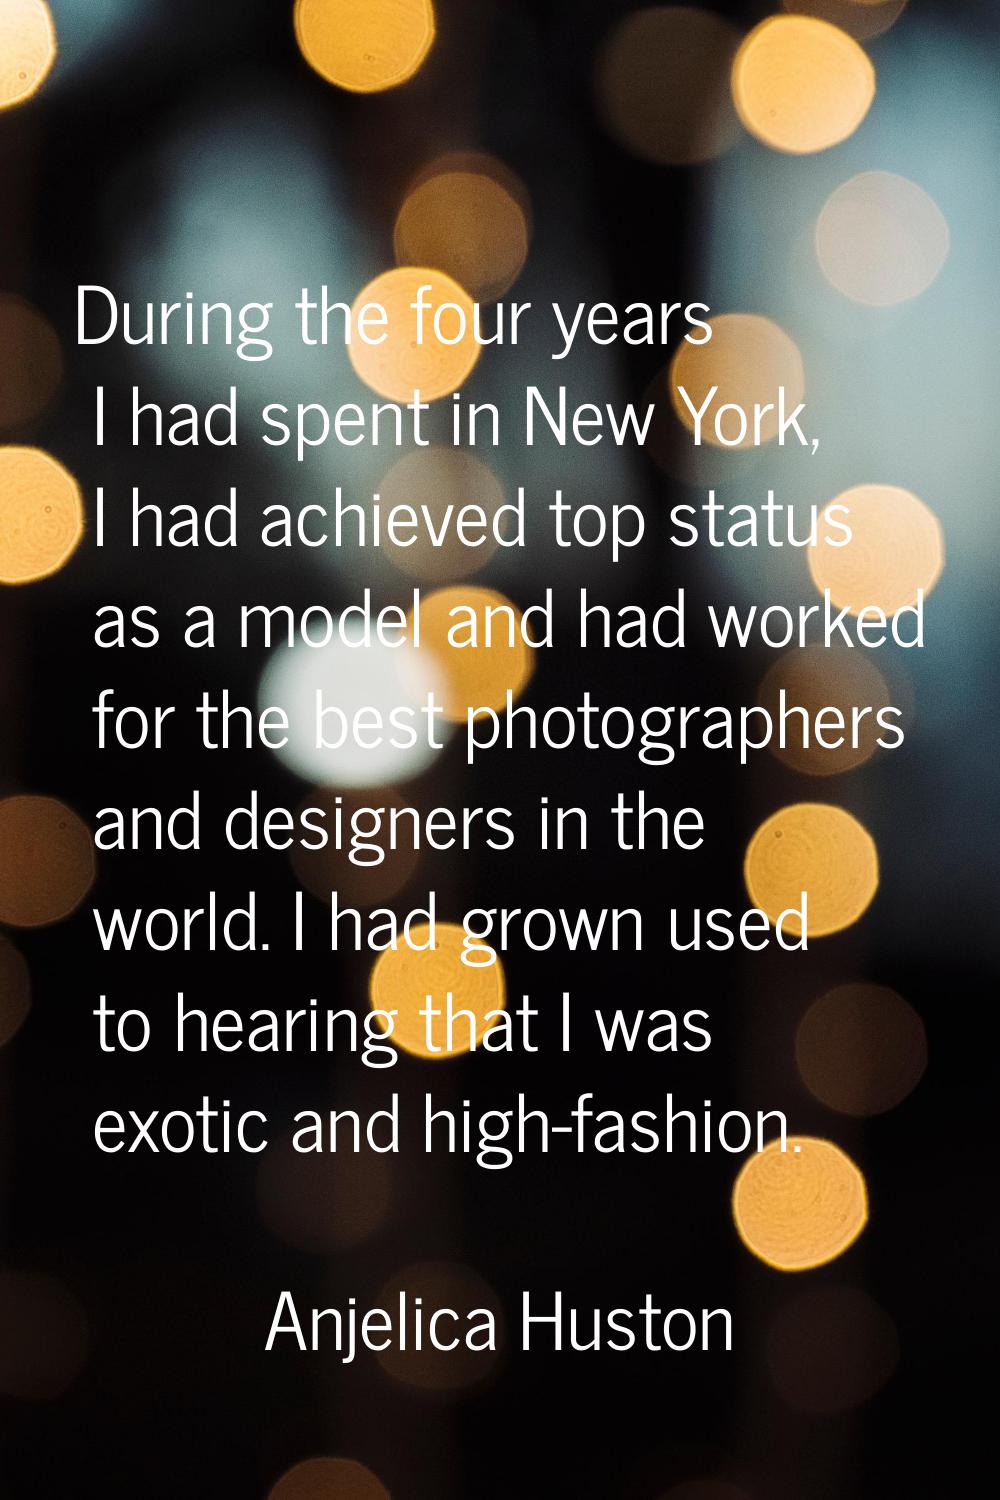 During the four years I had spent in New York, I had achieved top status as a model and had worked 